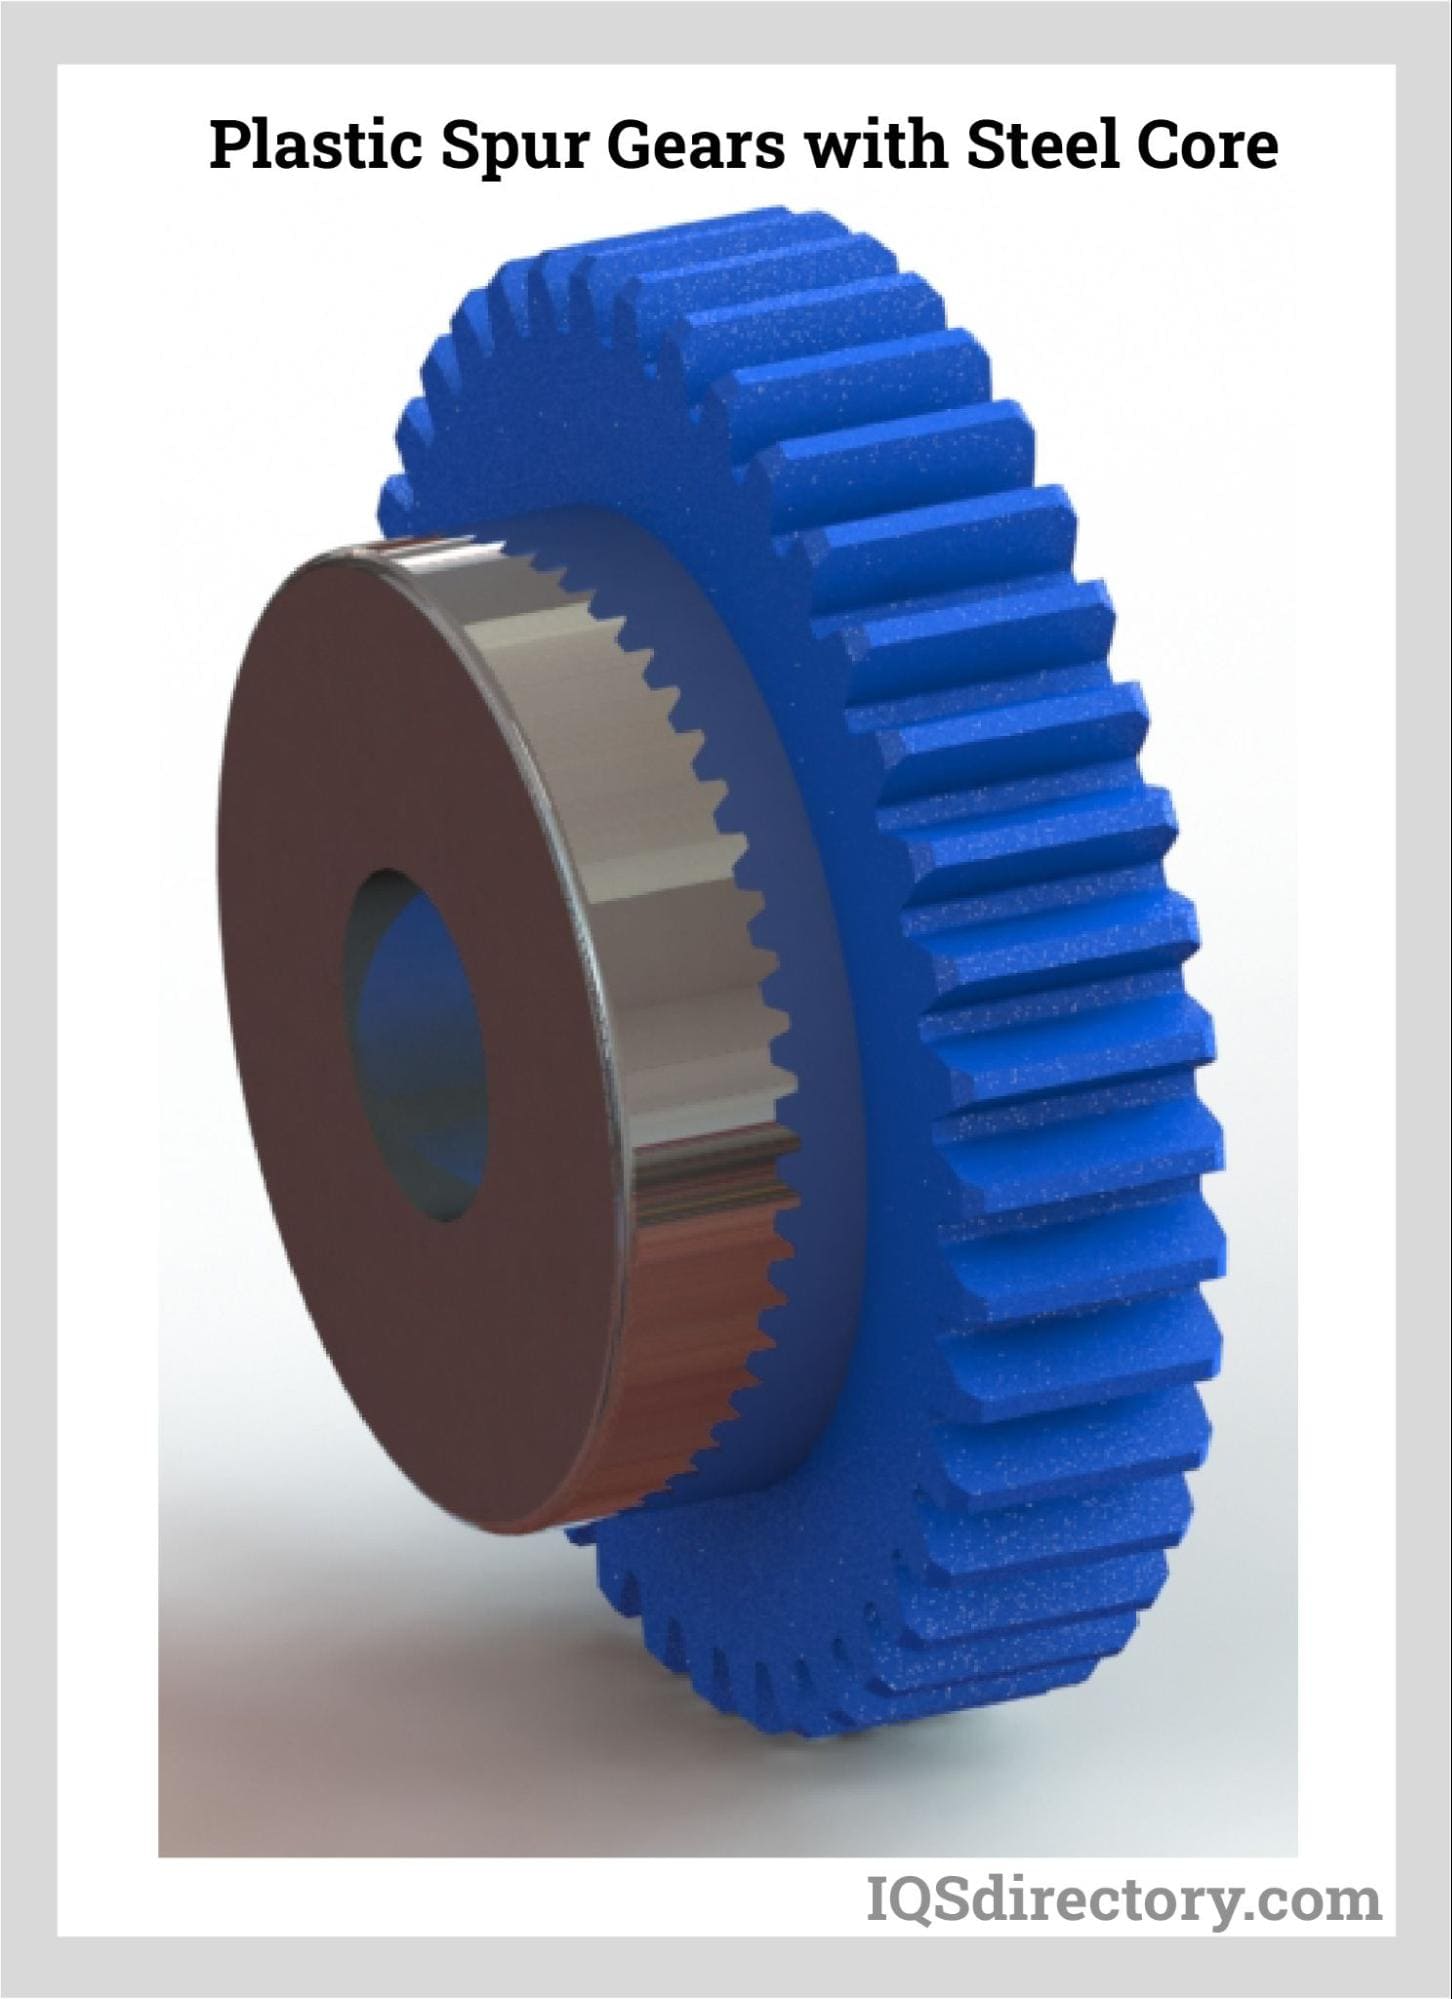 Plastic Spur Gears With Steel Core